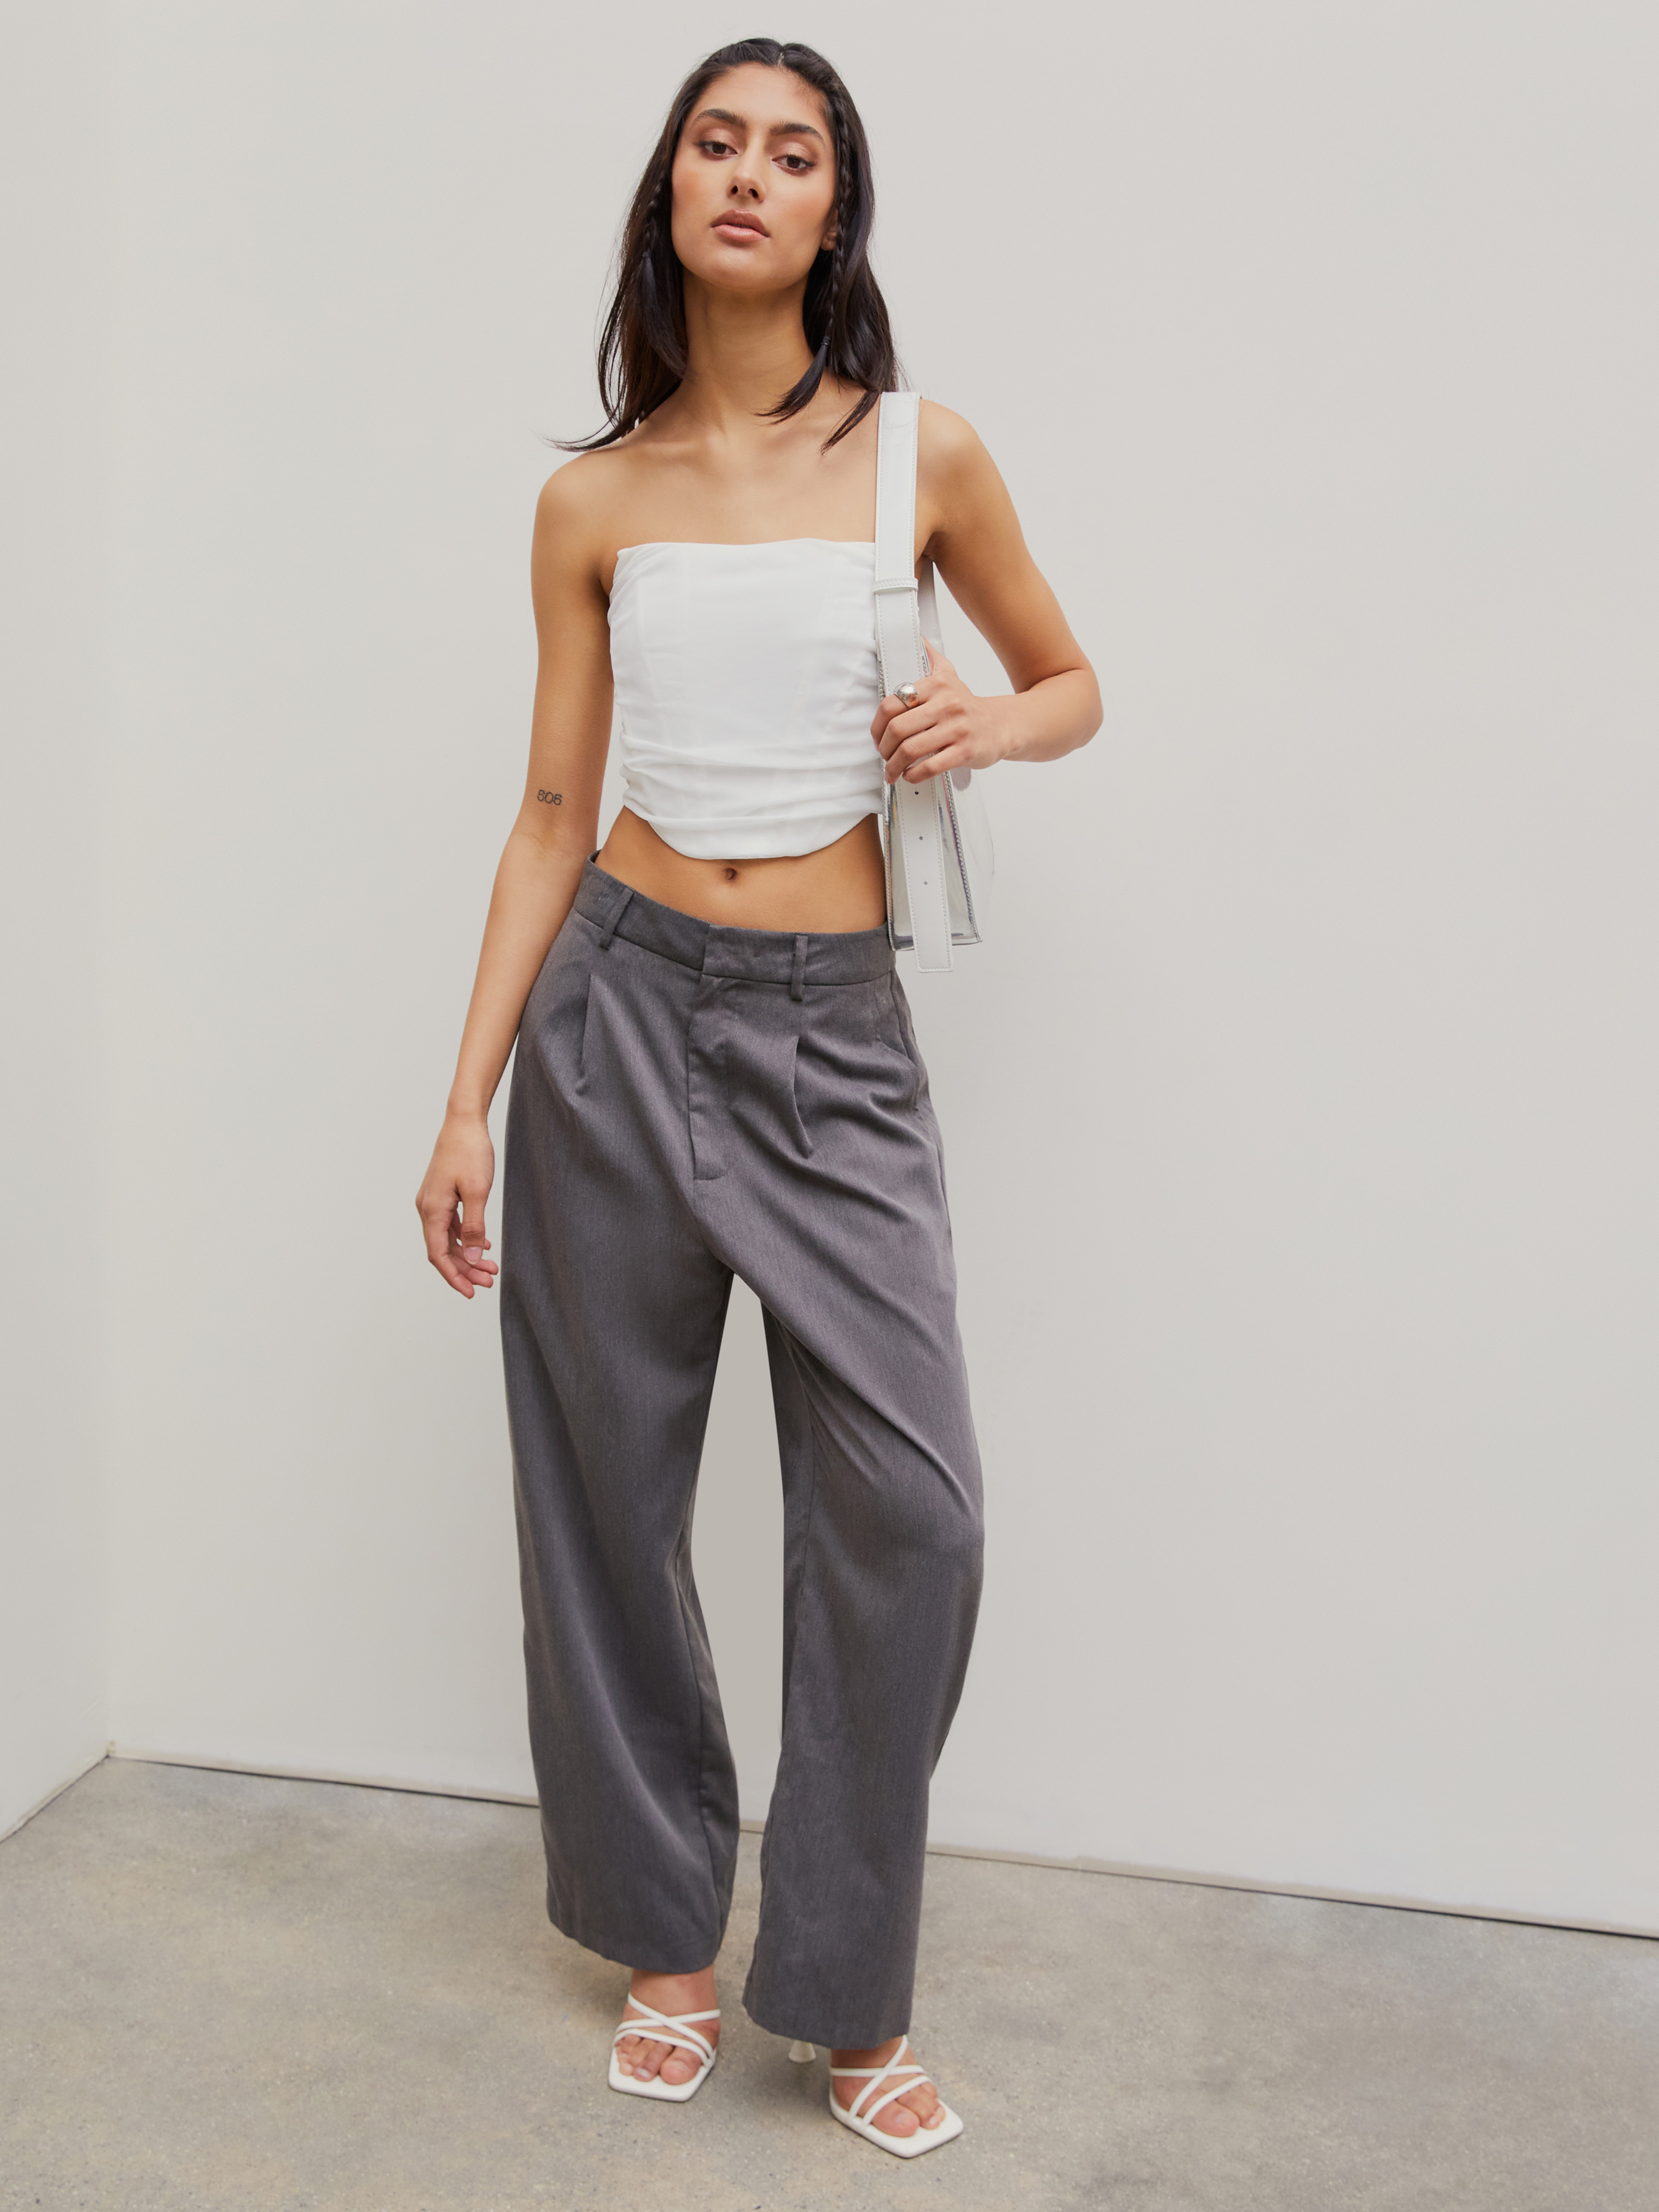 Solid Strapless Crop Tube Top - Cider